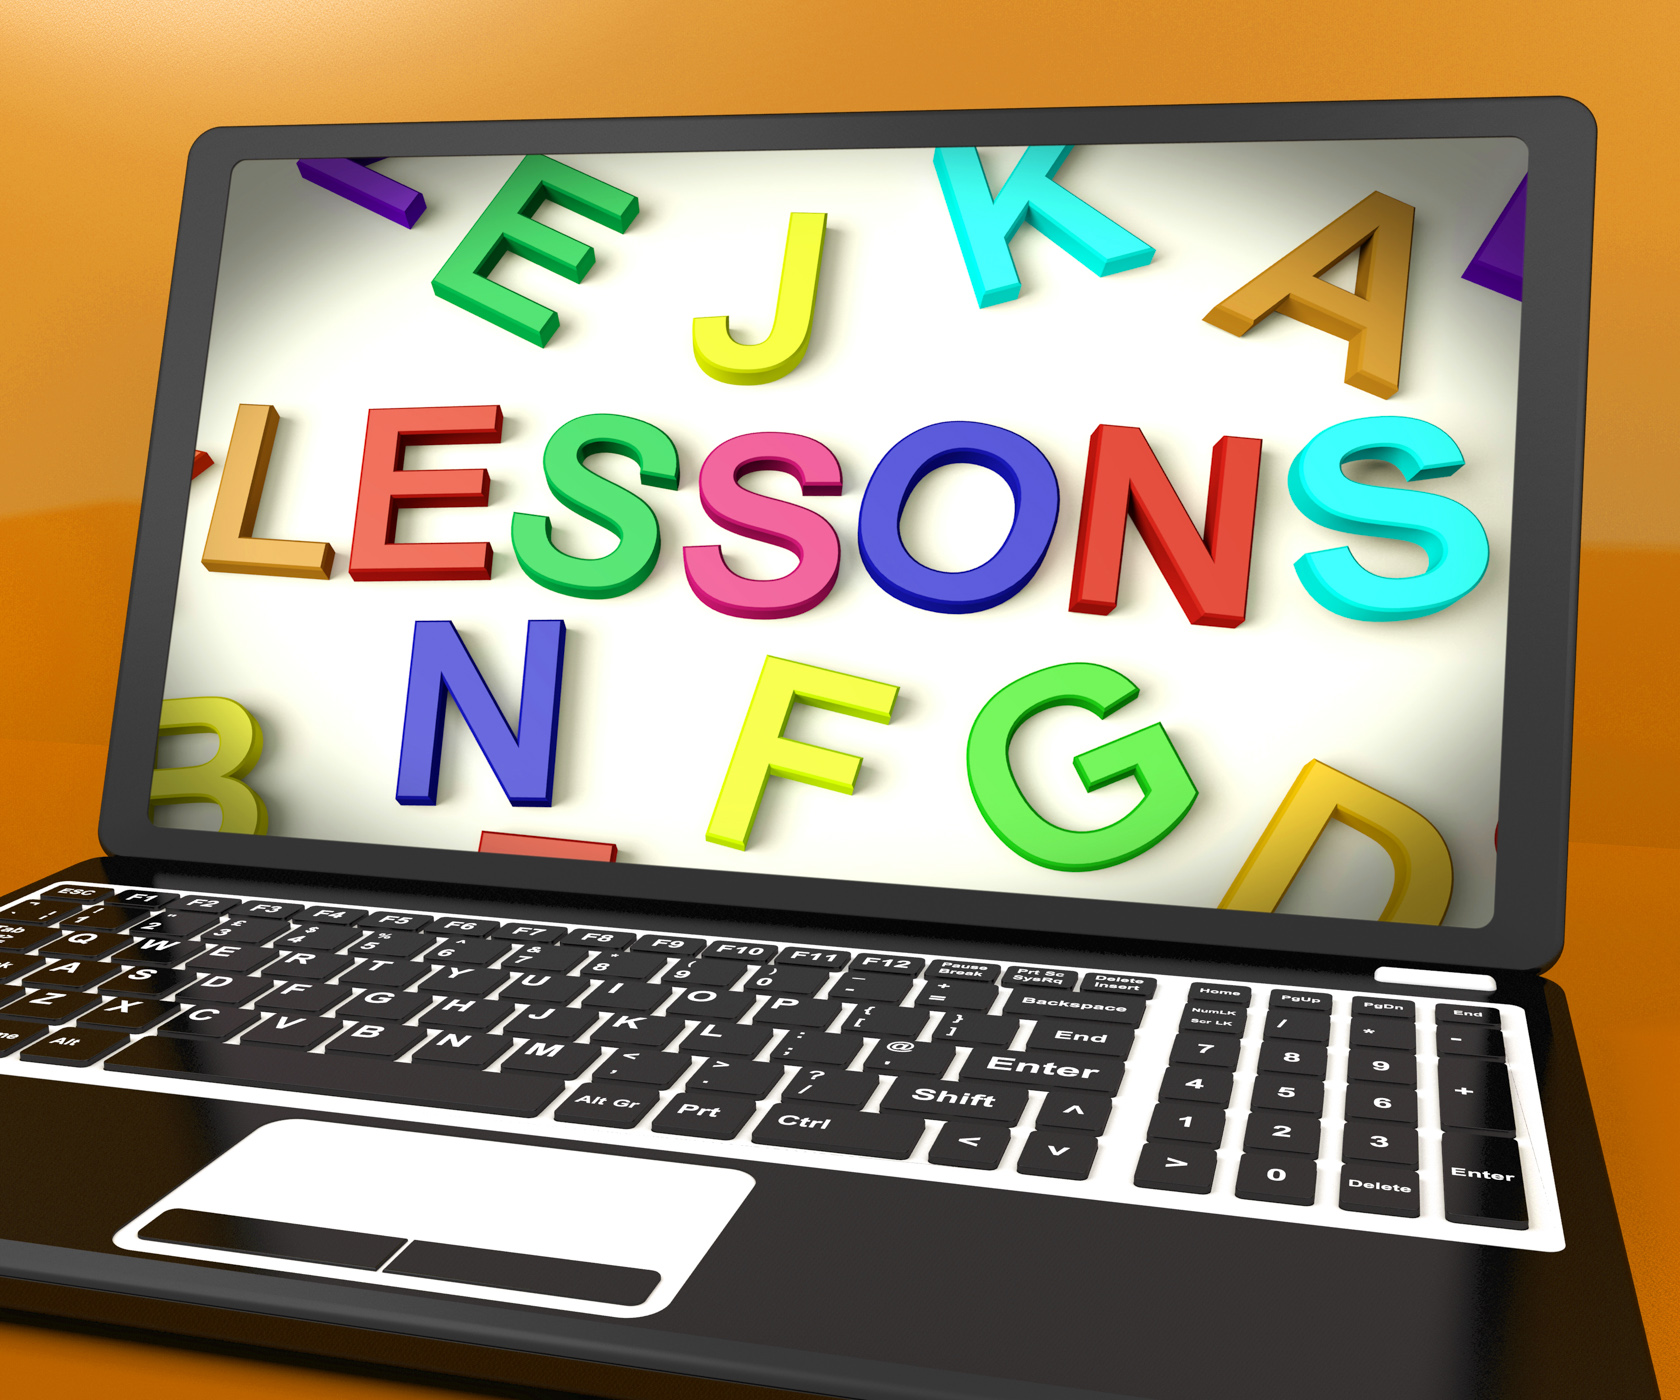 Lessons message on computer screen showing online education photo